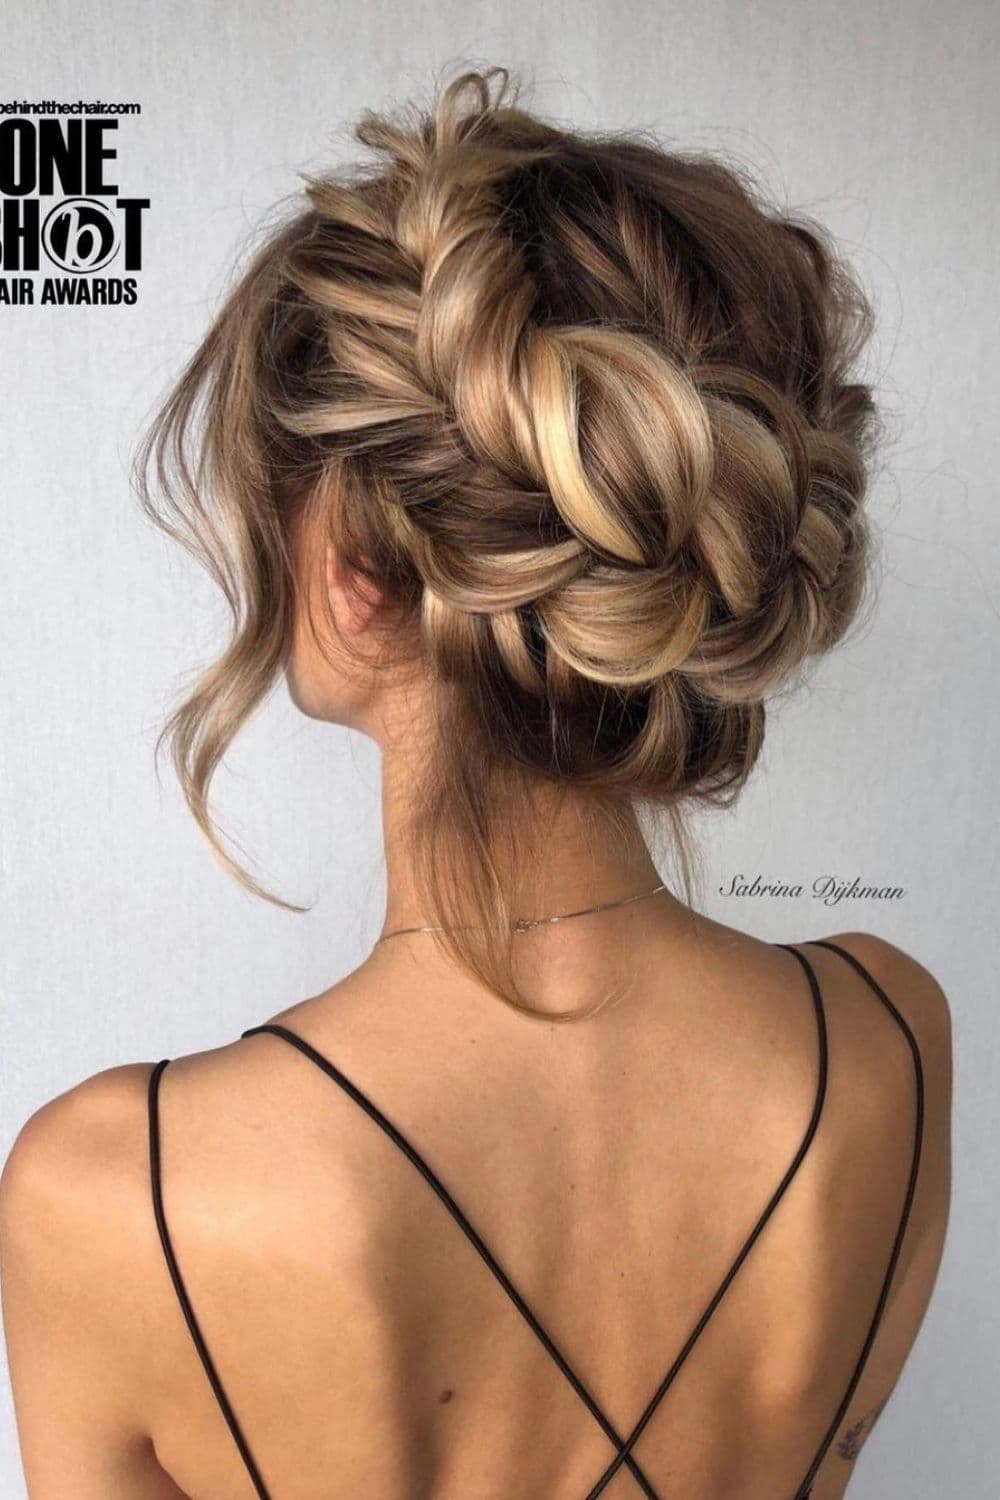 A woman with a blonde halo braid.